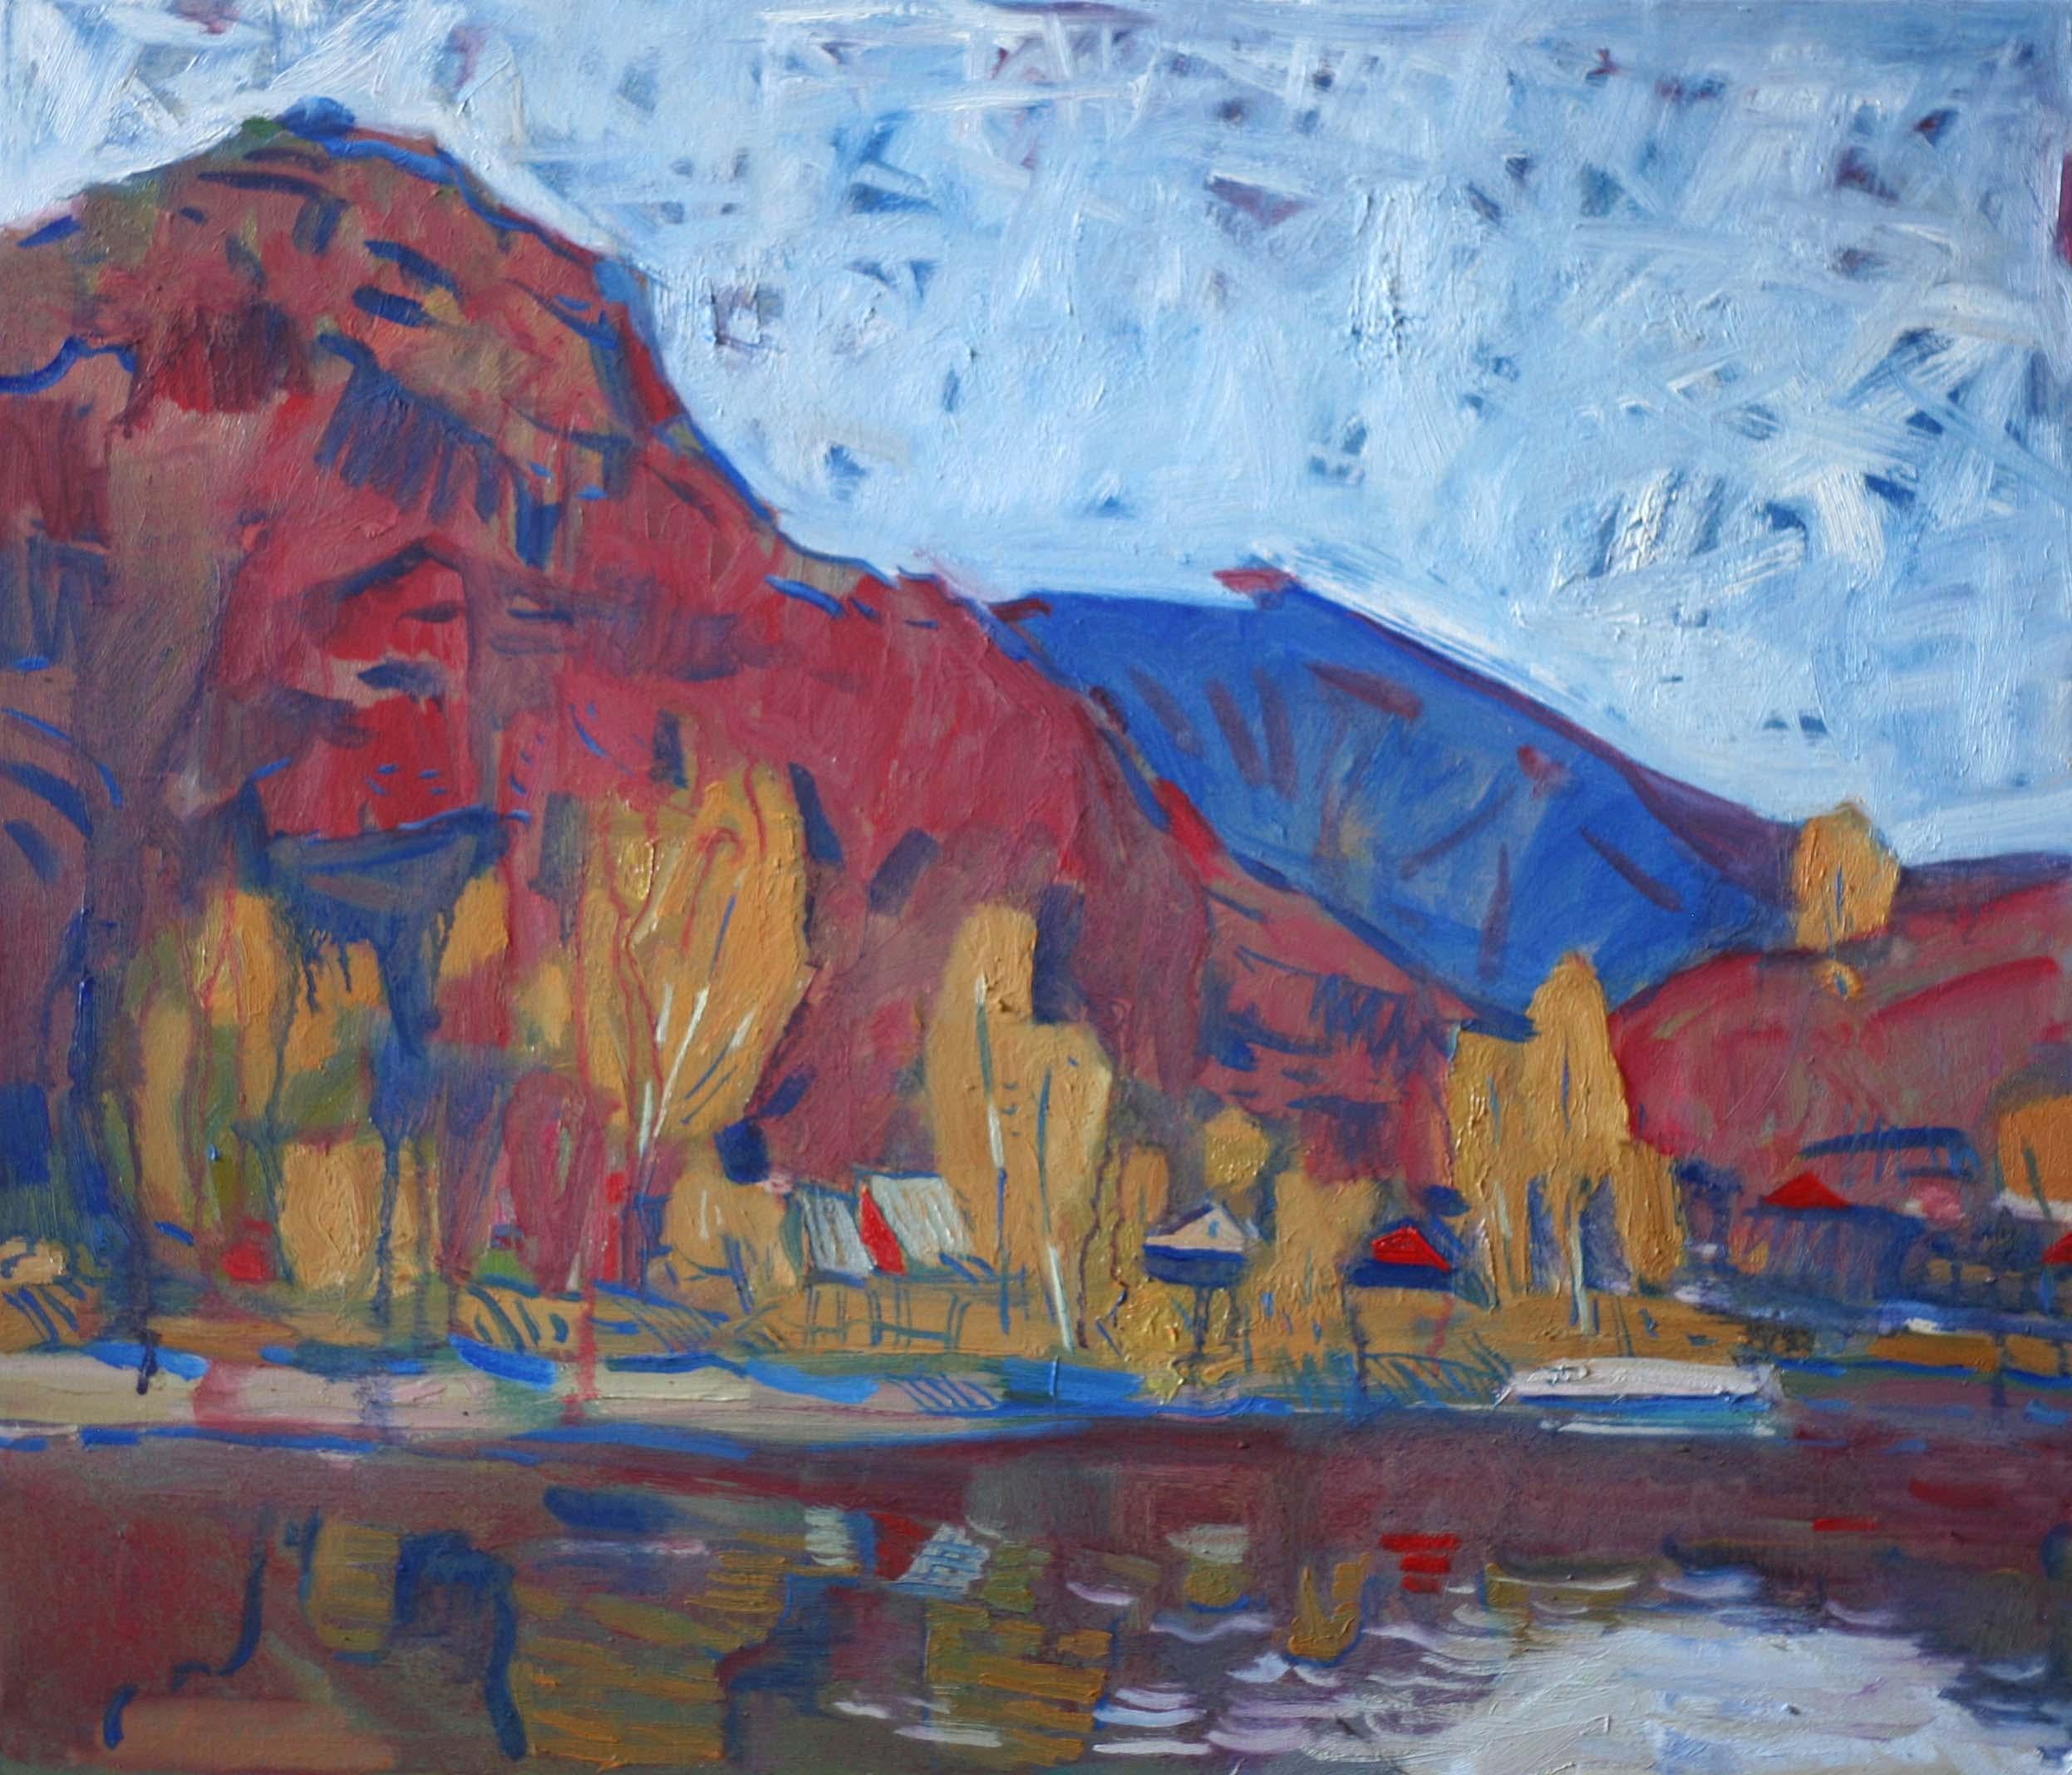 "Autumn" is an oil painting by the impressionist Maestro Volodymyr Nosan.

About the artwork:

TECHNIQUE:  oil painting
STYLE: Impressionist, Contemporary
Edition : Unique, signed
Weight: Approximately 3 kg.
The painting has no frame.

His paintings